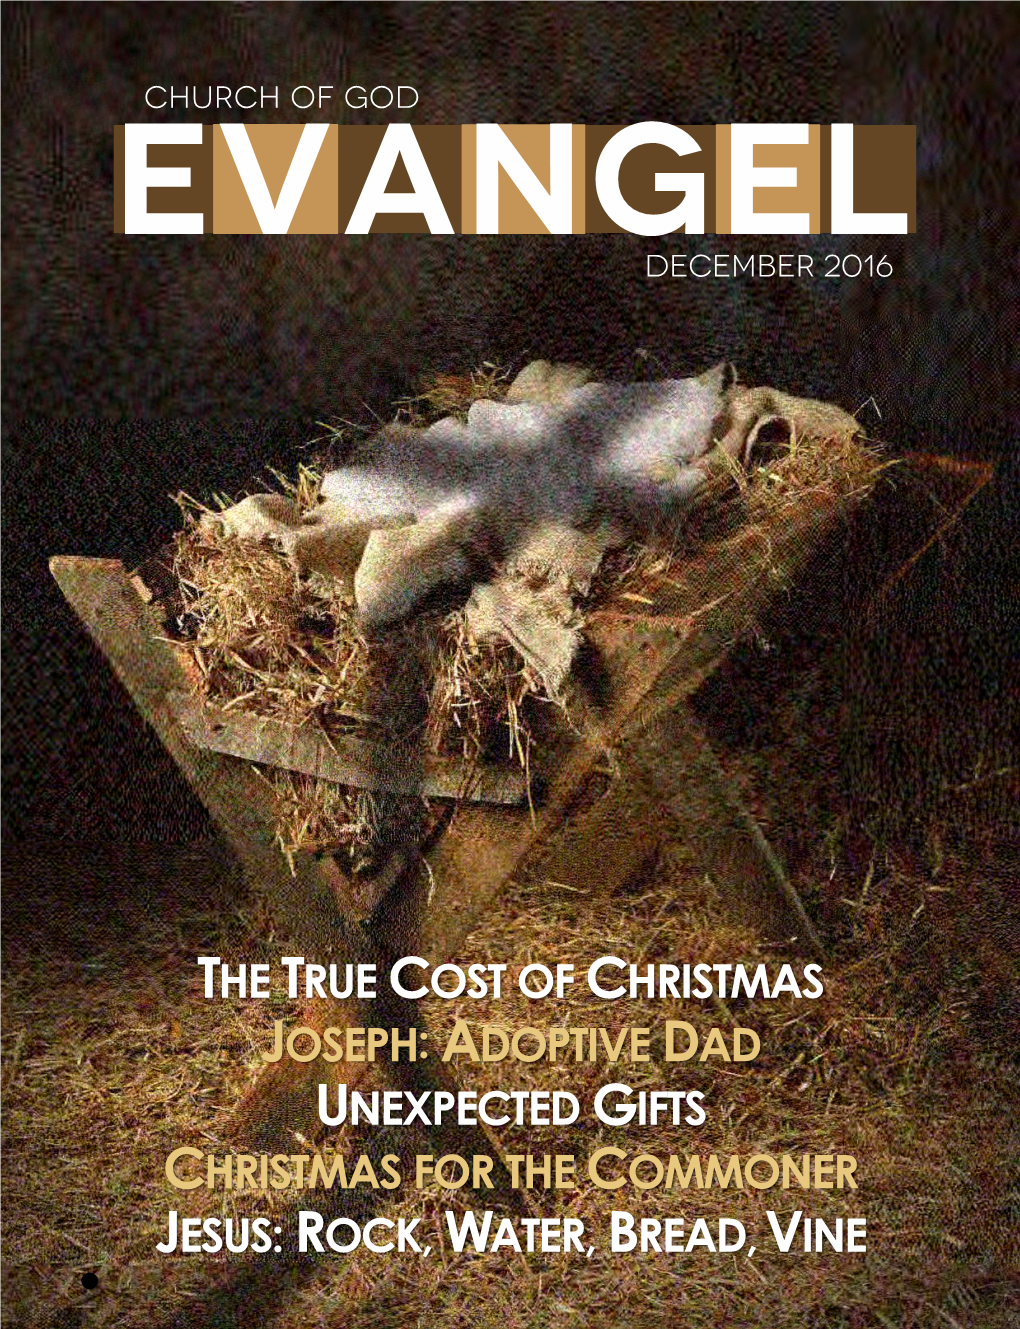 The True Cost of Christmas Joseph: Adoptive Dad Unexpected Gifts Christmas for the Commoner Jesus: Rock, Water, Bread, Vine •